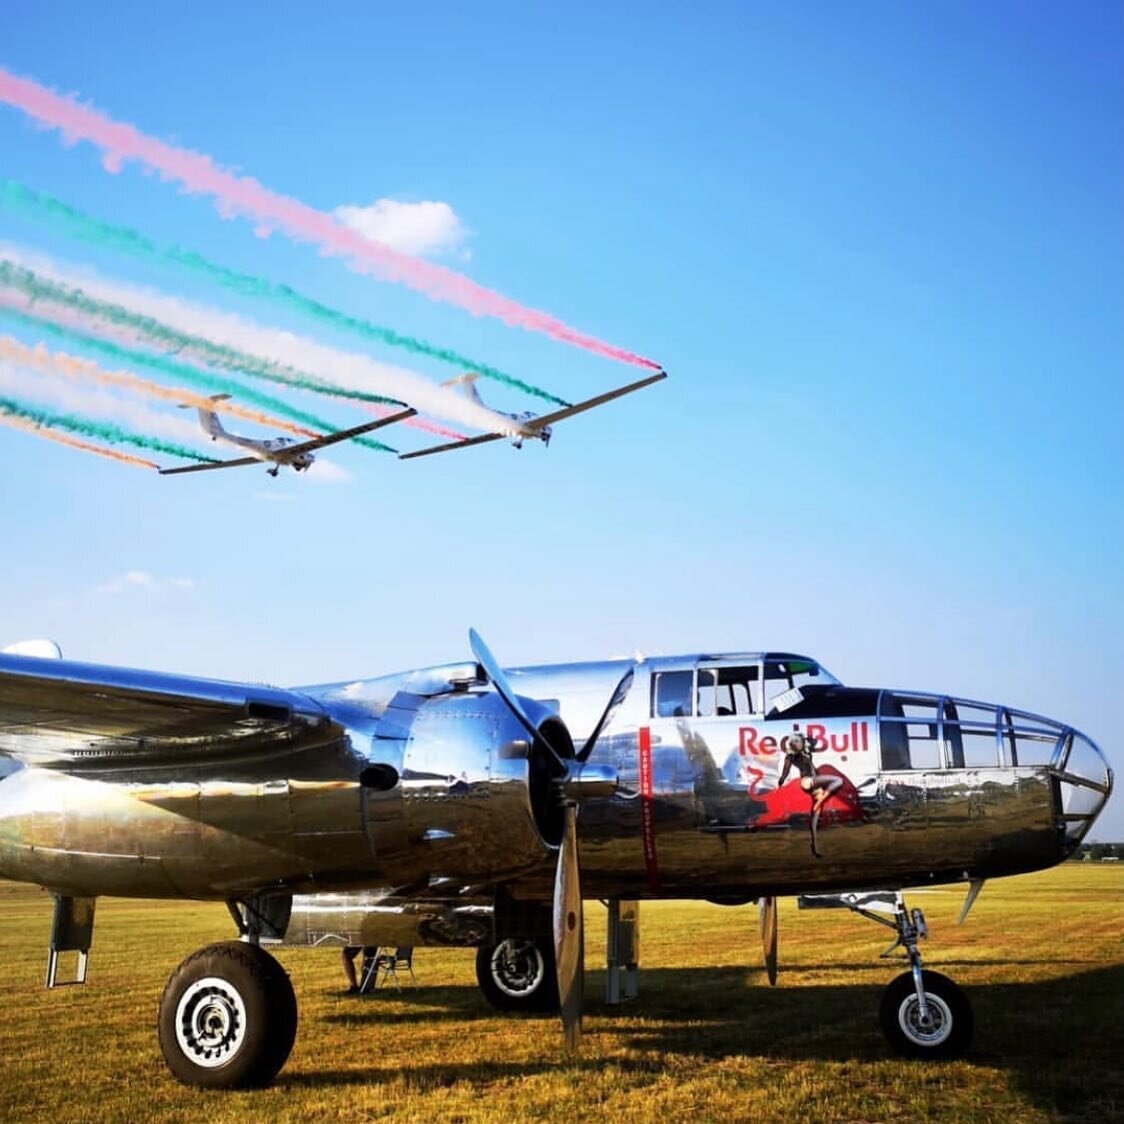 @theflyingbulls 🙏🤙👍🔥🤙 some of the many lovely pictures we are seeing please message us and we will credit you as they are stunning &hellip; 😍 
Poland 🇵🇱 never disappoints 🤙🔥🔥Antidotum Airshow Leszno #aerosparx #flyingbulls ❤️
#FLYAerosparx